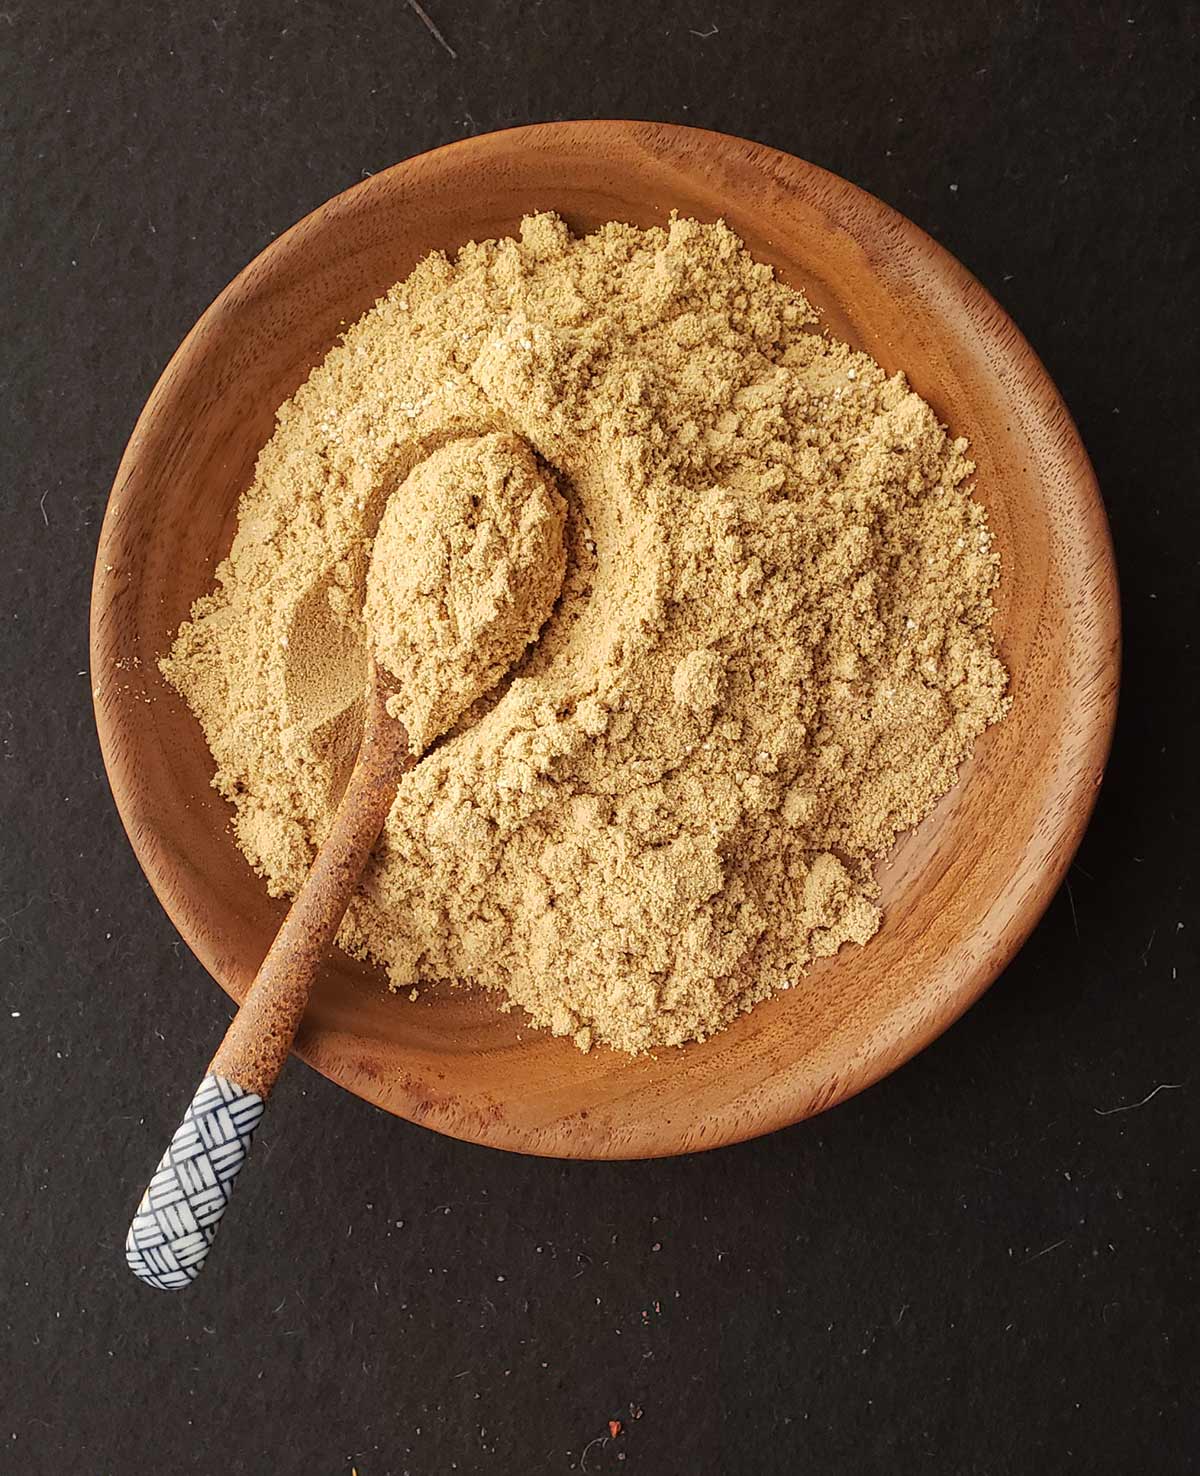 A bowl of finished acorn flour